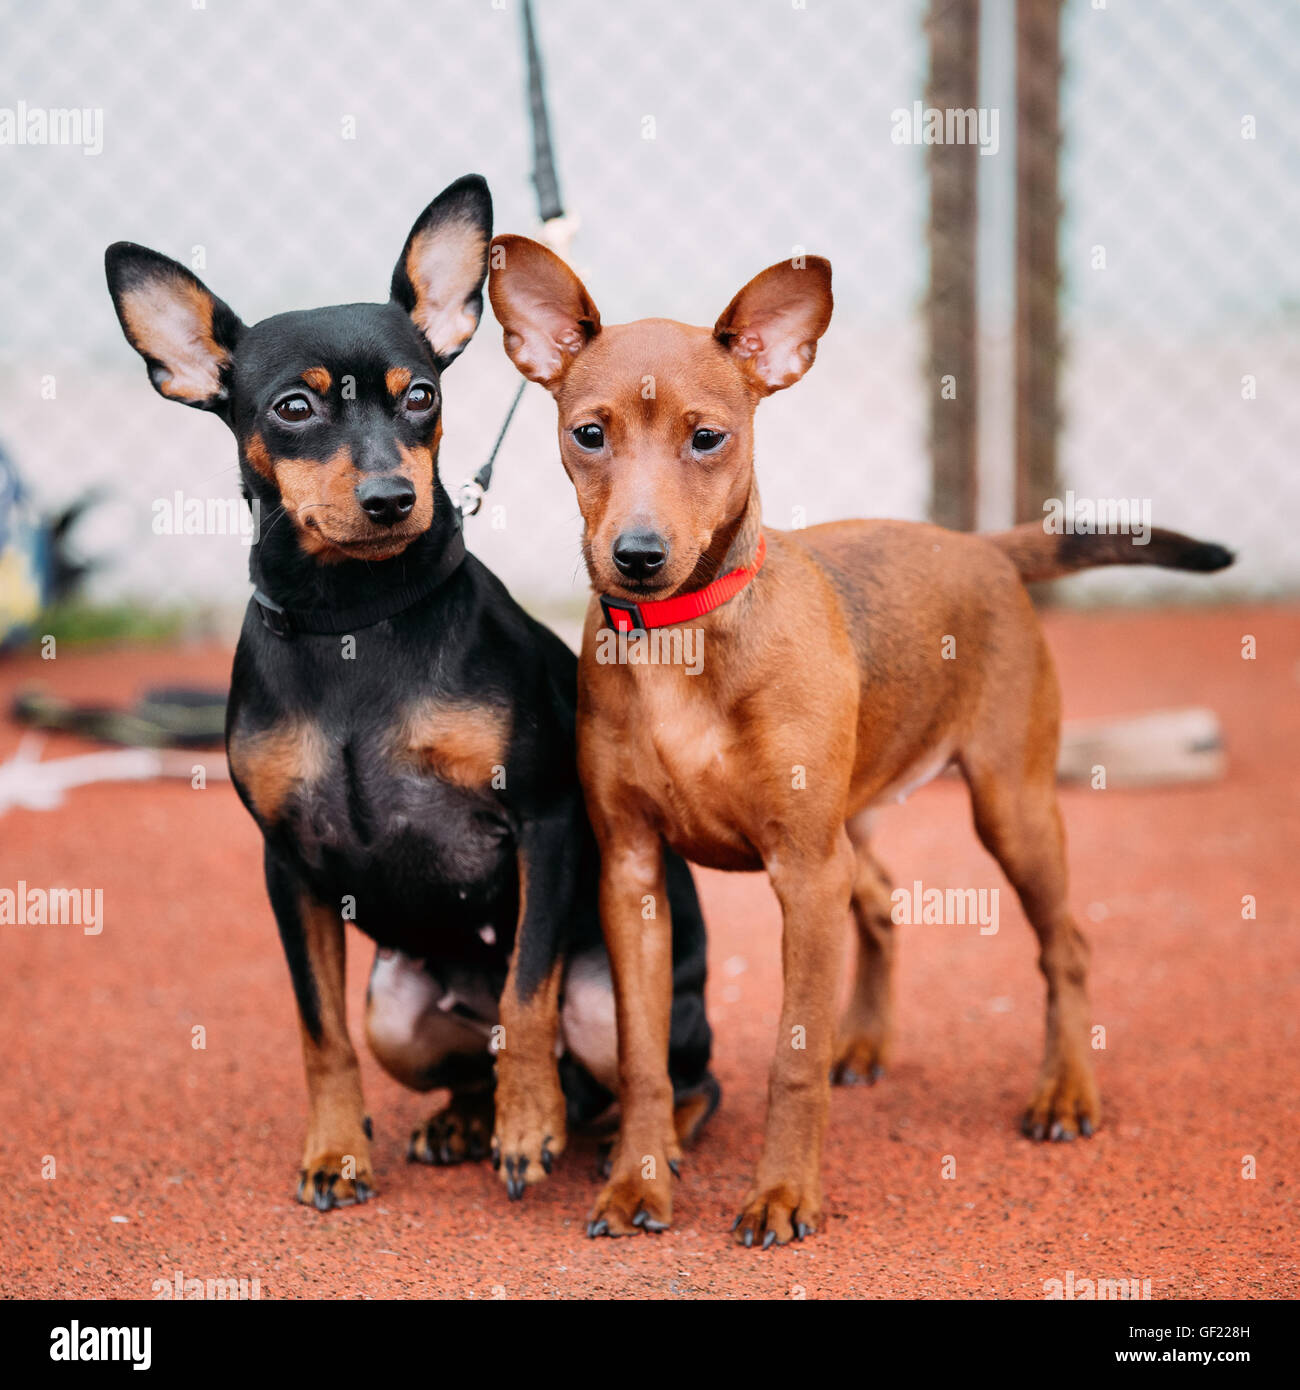 Two Friendly Brown And Black Miniature Pinschers Pinchers Staying Together On Red Floor Stock Photo